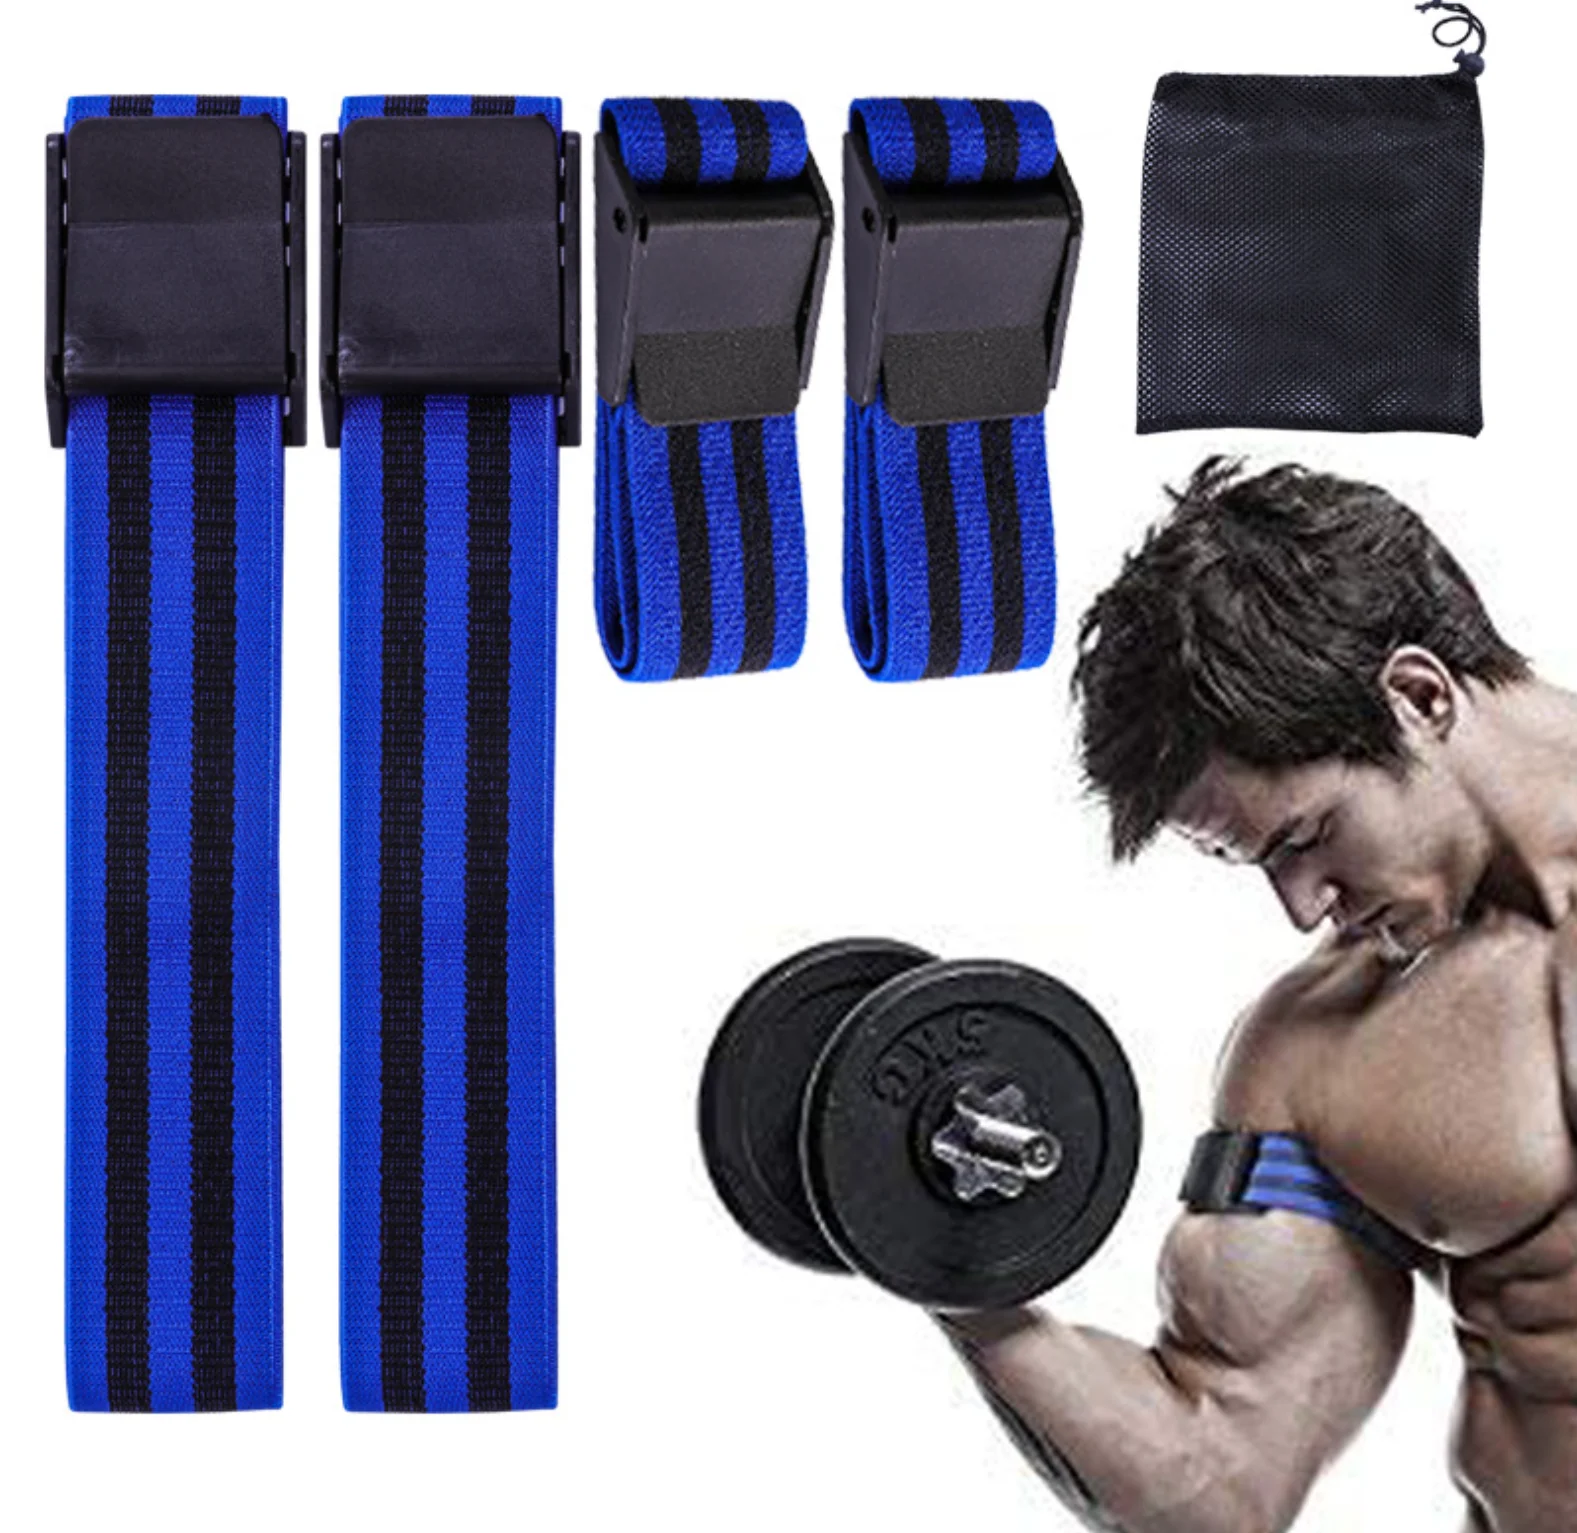 

Occlusion Bands for Weight Lifting BFR booty bands leg use blood Flow Restriction Bands, Red+black / blue+black